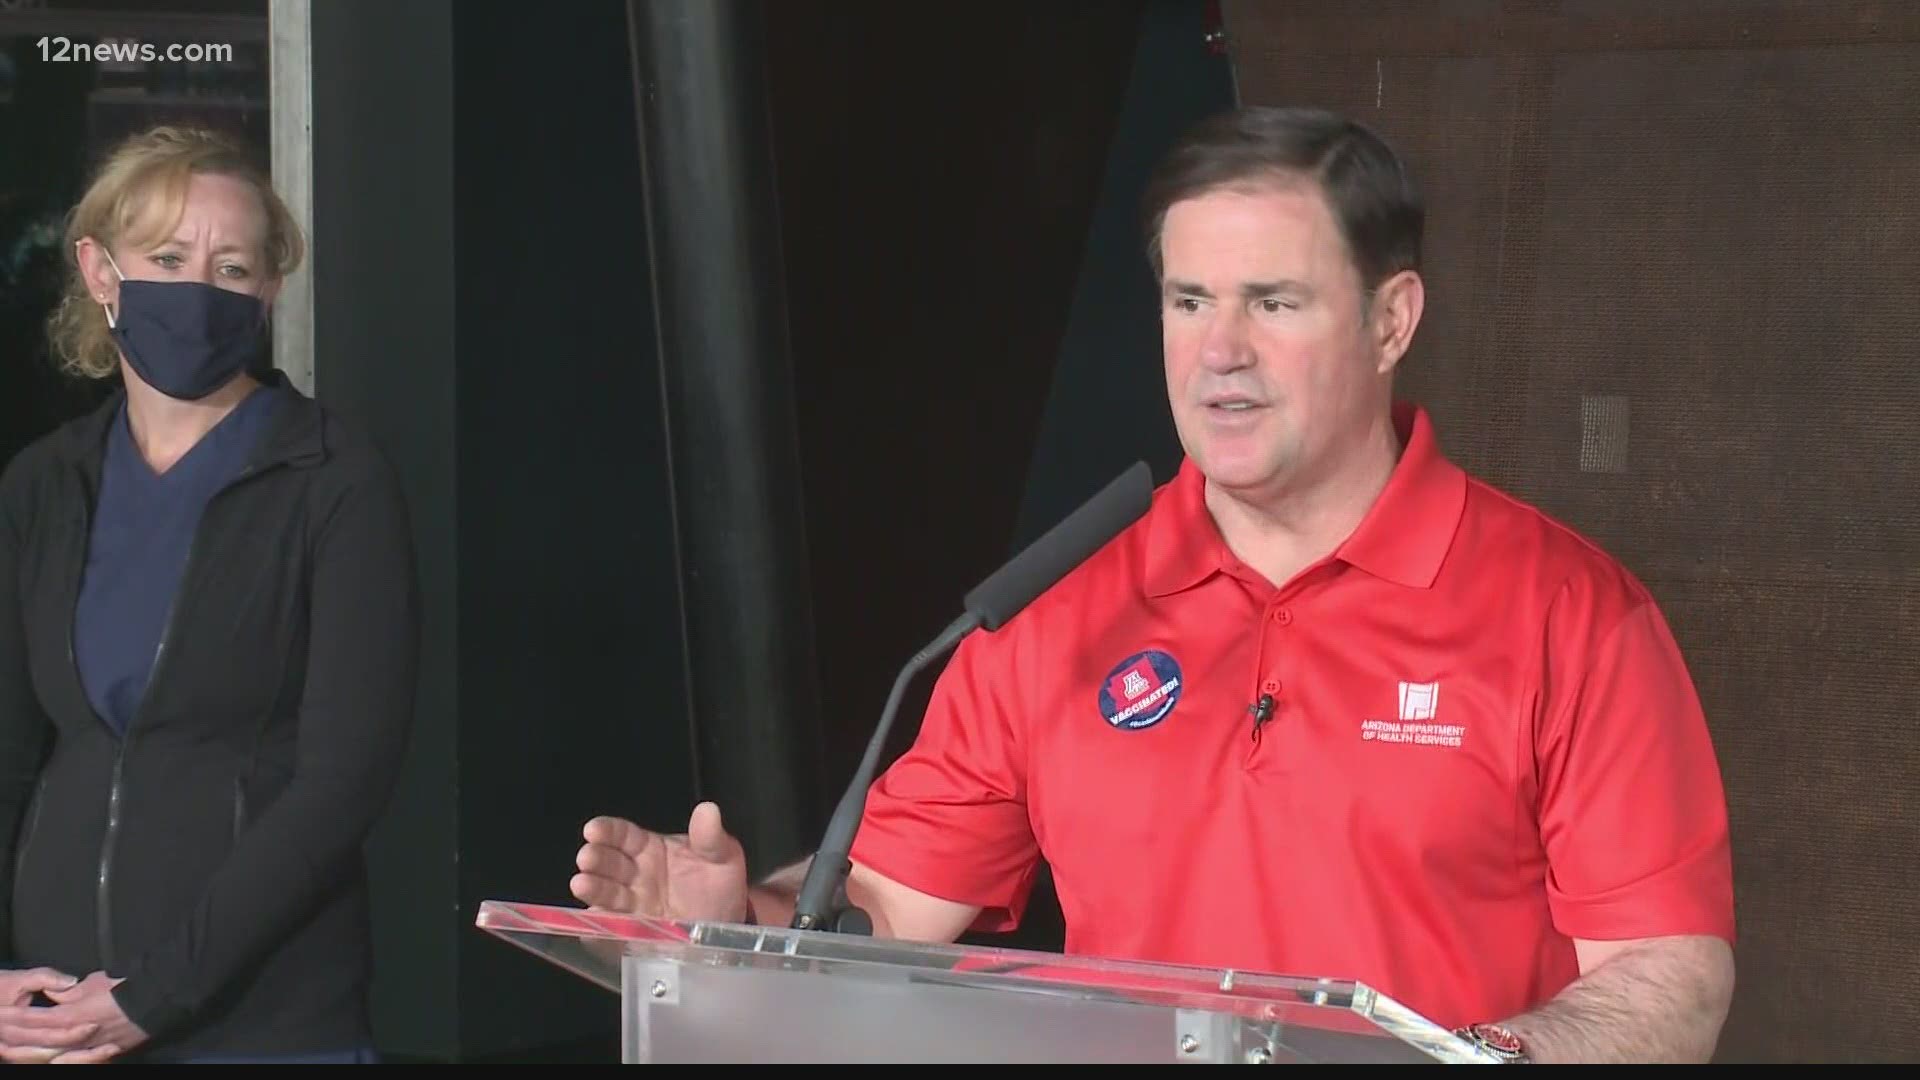 Gov. Ducey offers a statement about Arizona COVID-19 cases that are driven by the delta variant. Brahm Resnik has the story.